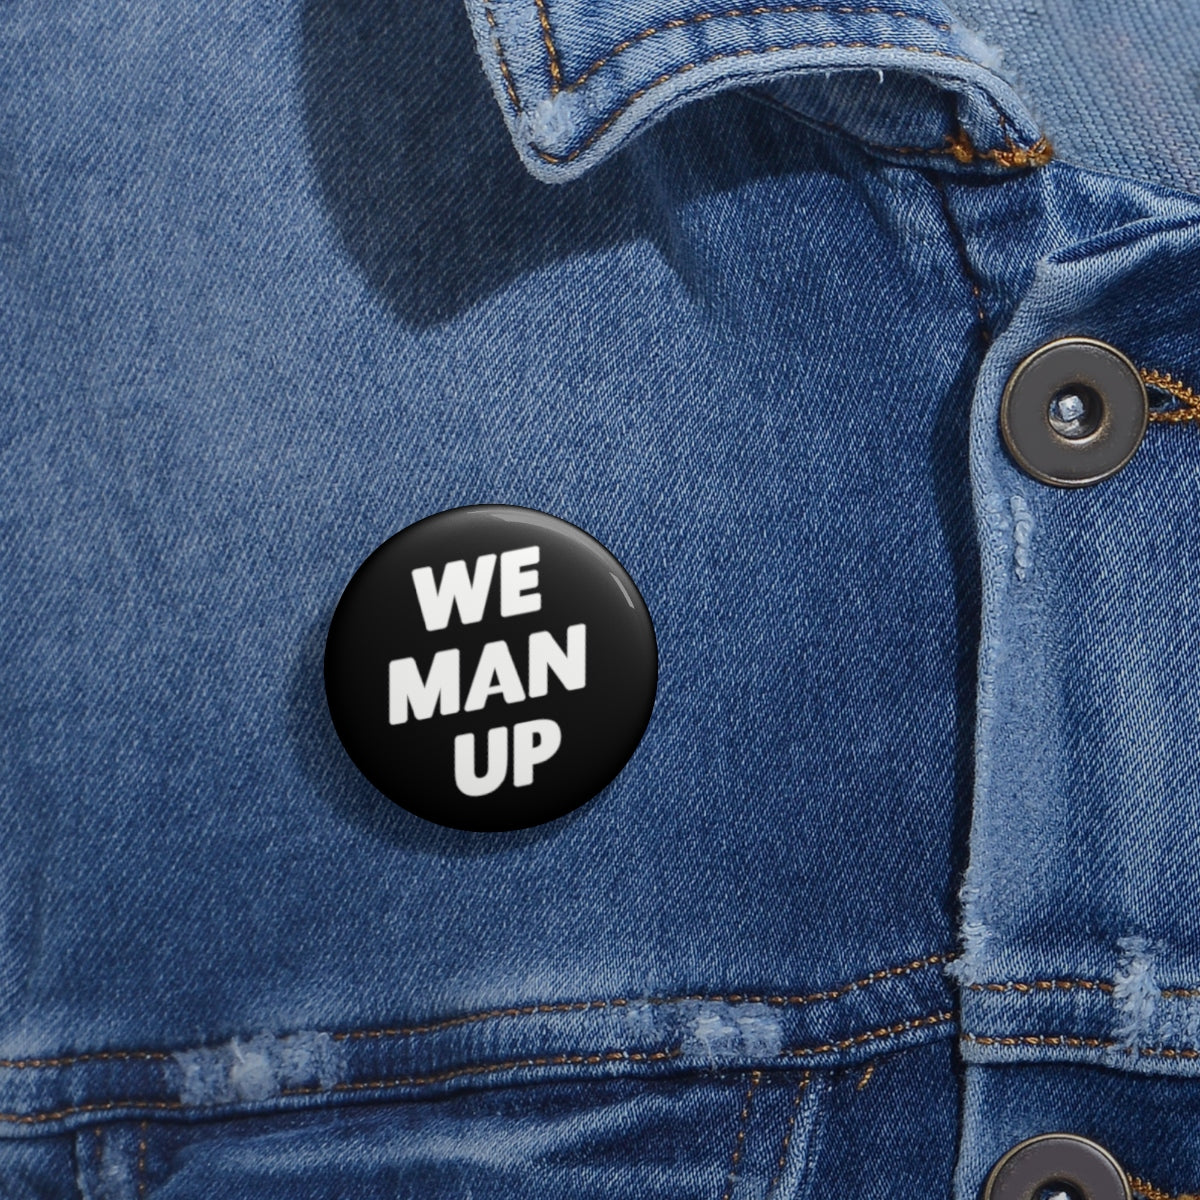 Copy of Custom Pin Buttons